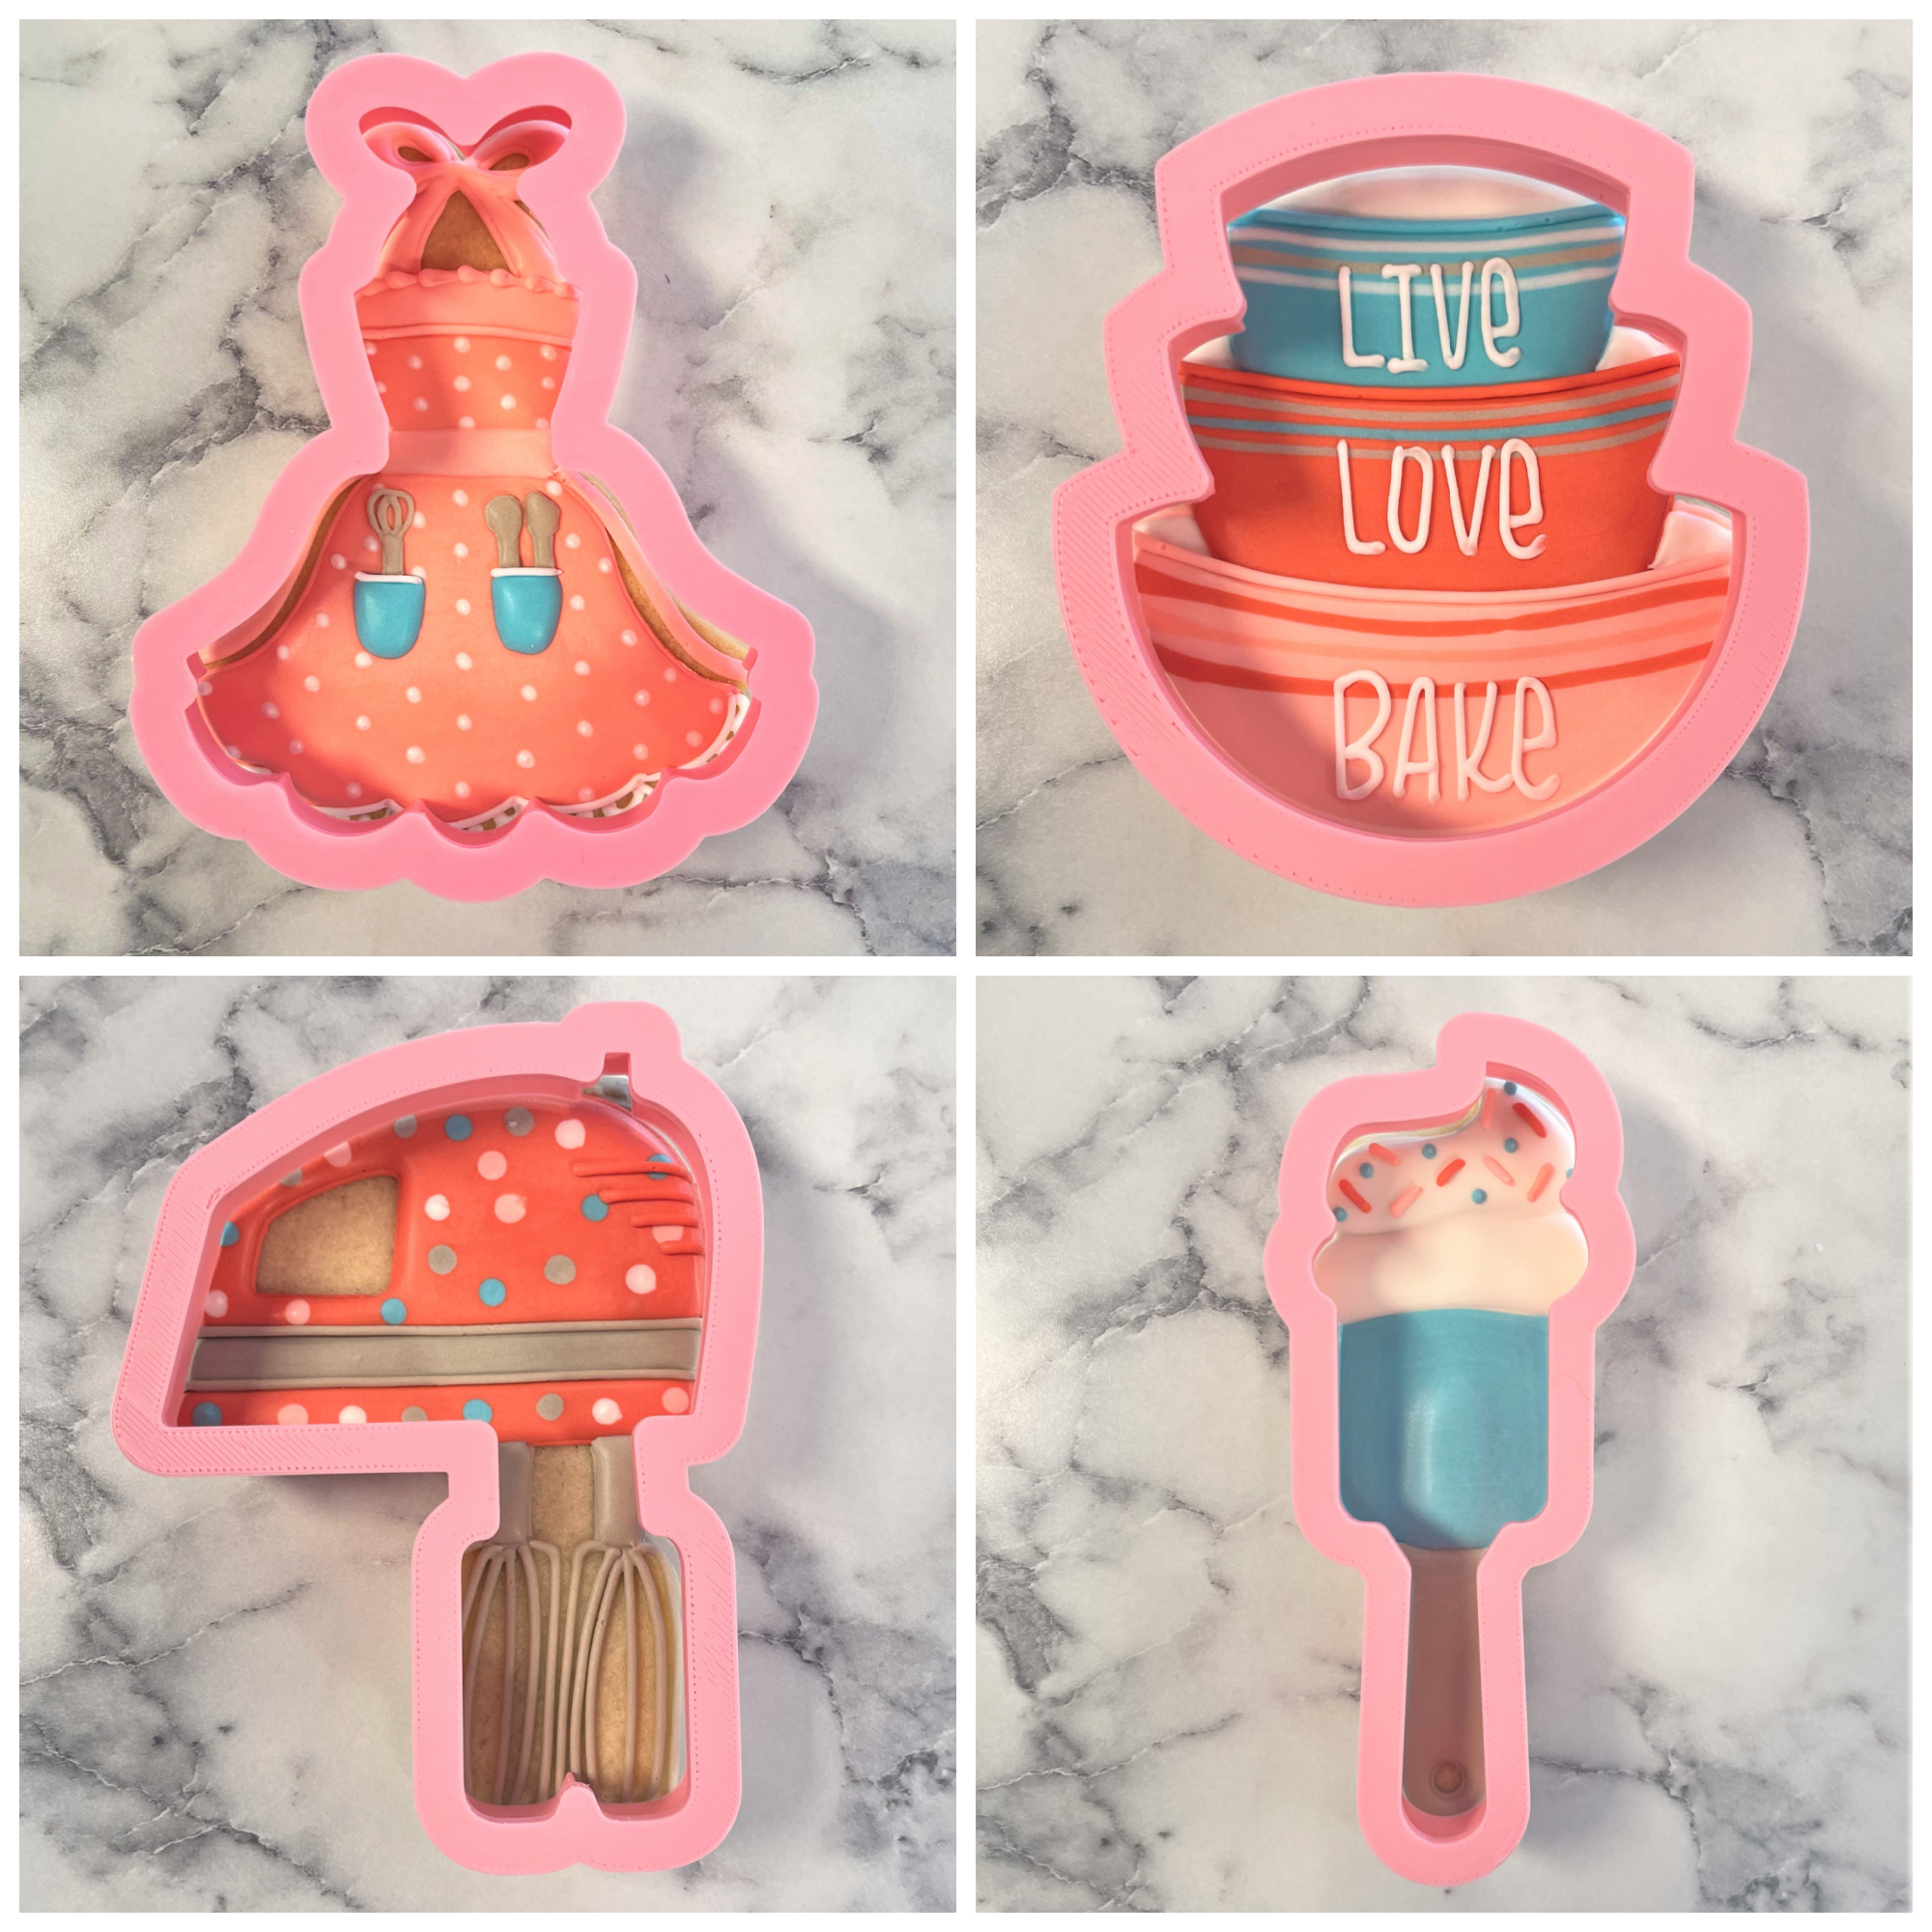 Stocking Stuffers: Cookie Decorating Class and Digital Files